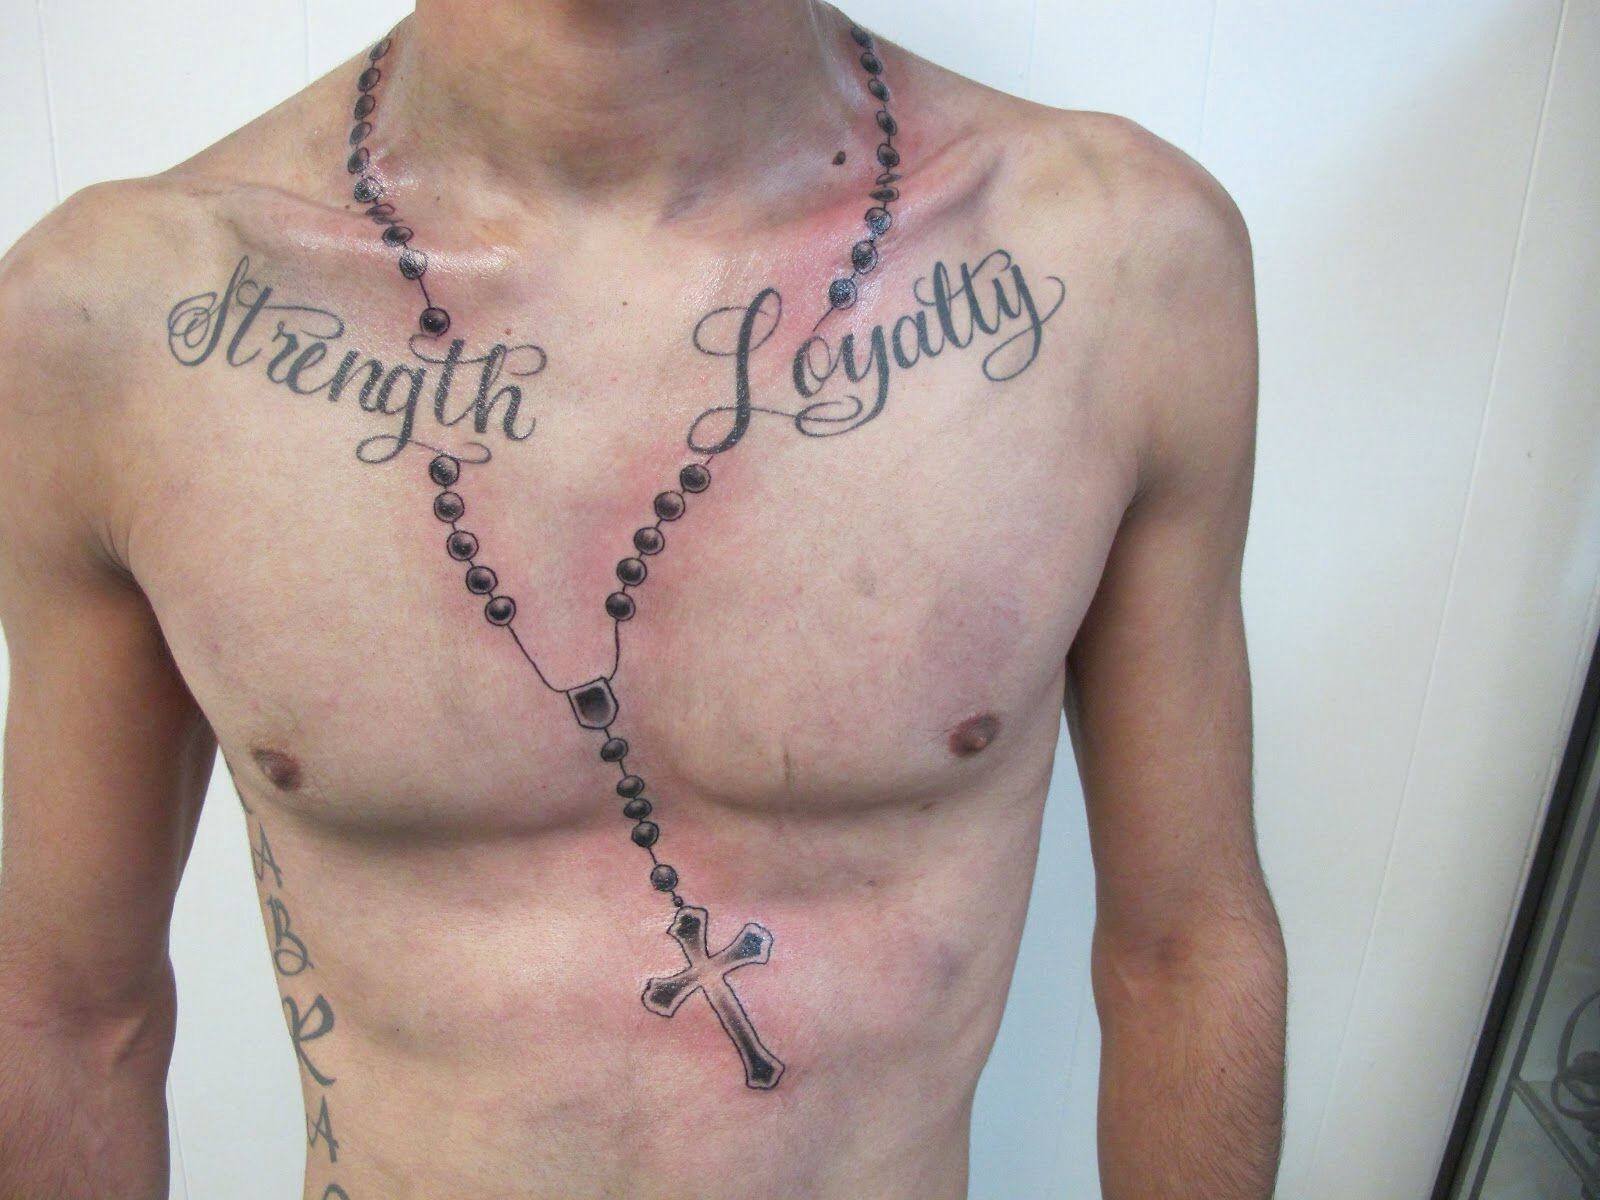 1. Rosary tattoo on chest designs - wide 5